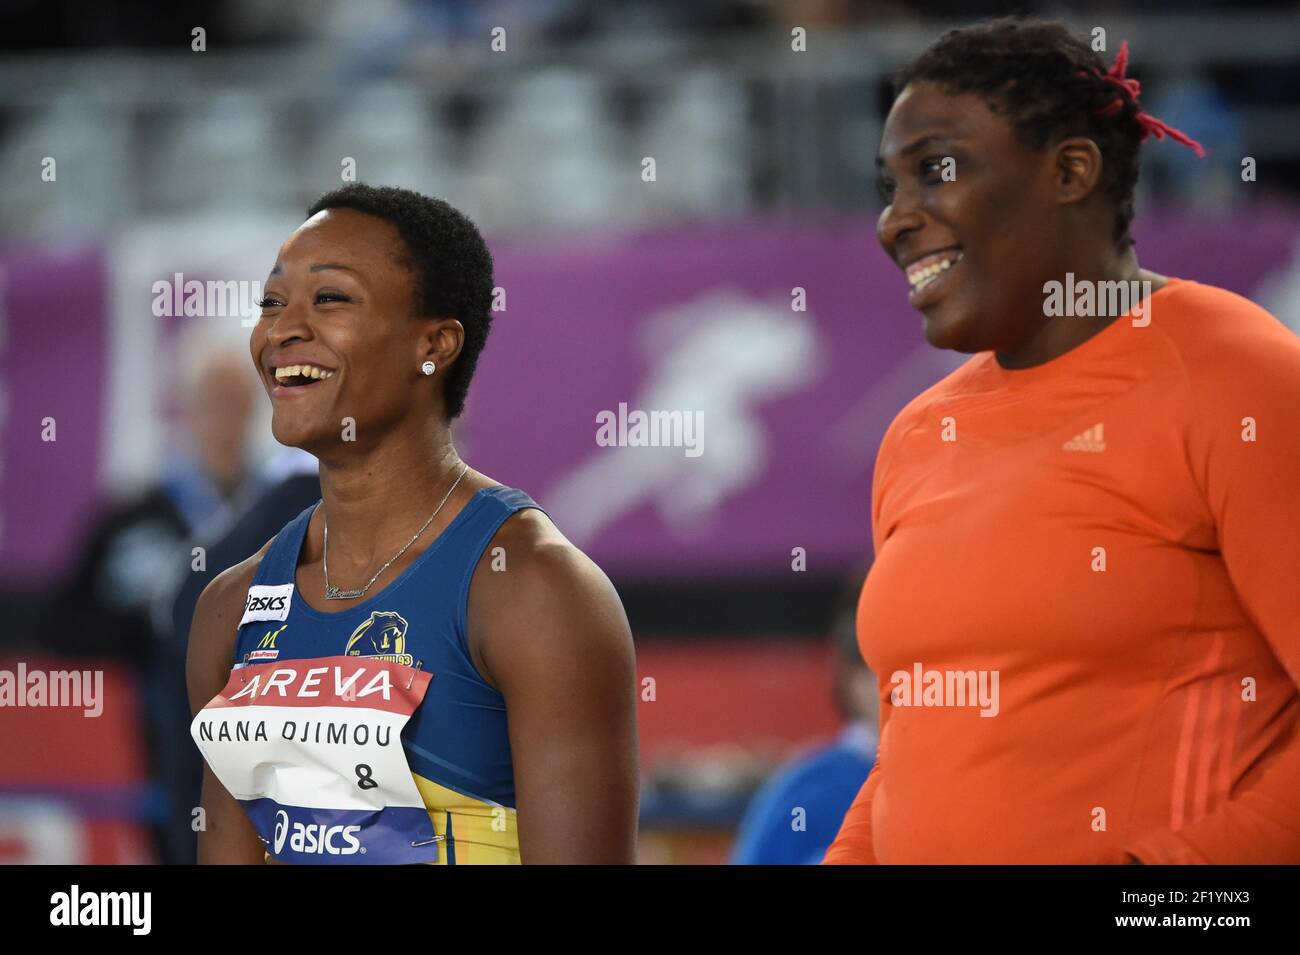 Antoinette Nana Djimou Ida (FRA) and Jessica Cerival (FRA) competes on Shot Put final during the French Championships Indoor Aubiere 2015, at Jean-Pellez Stadium in Clermont-Ferrand, France, on February 20-21, 2015. Photo Stephane Kempinaire / KMSP / DPPI Stock Photo